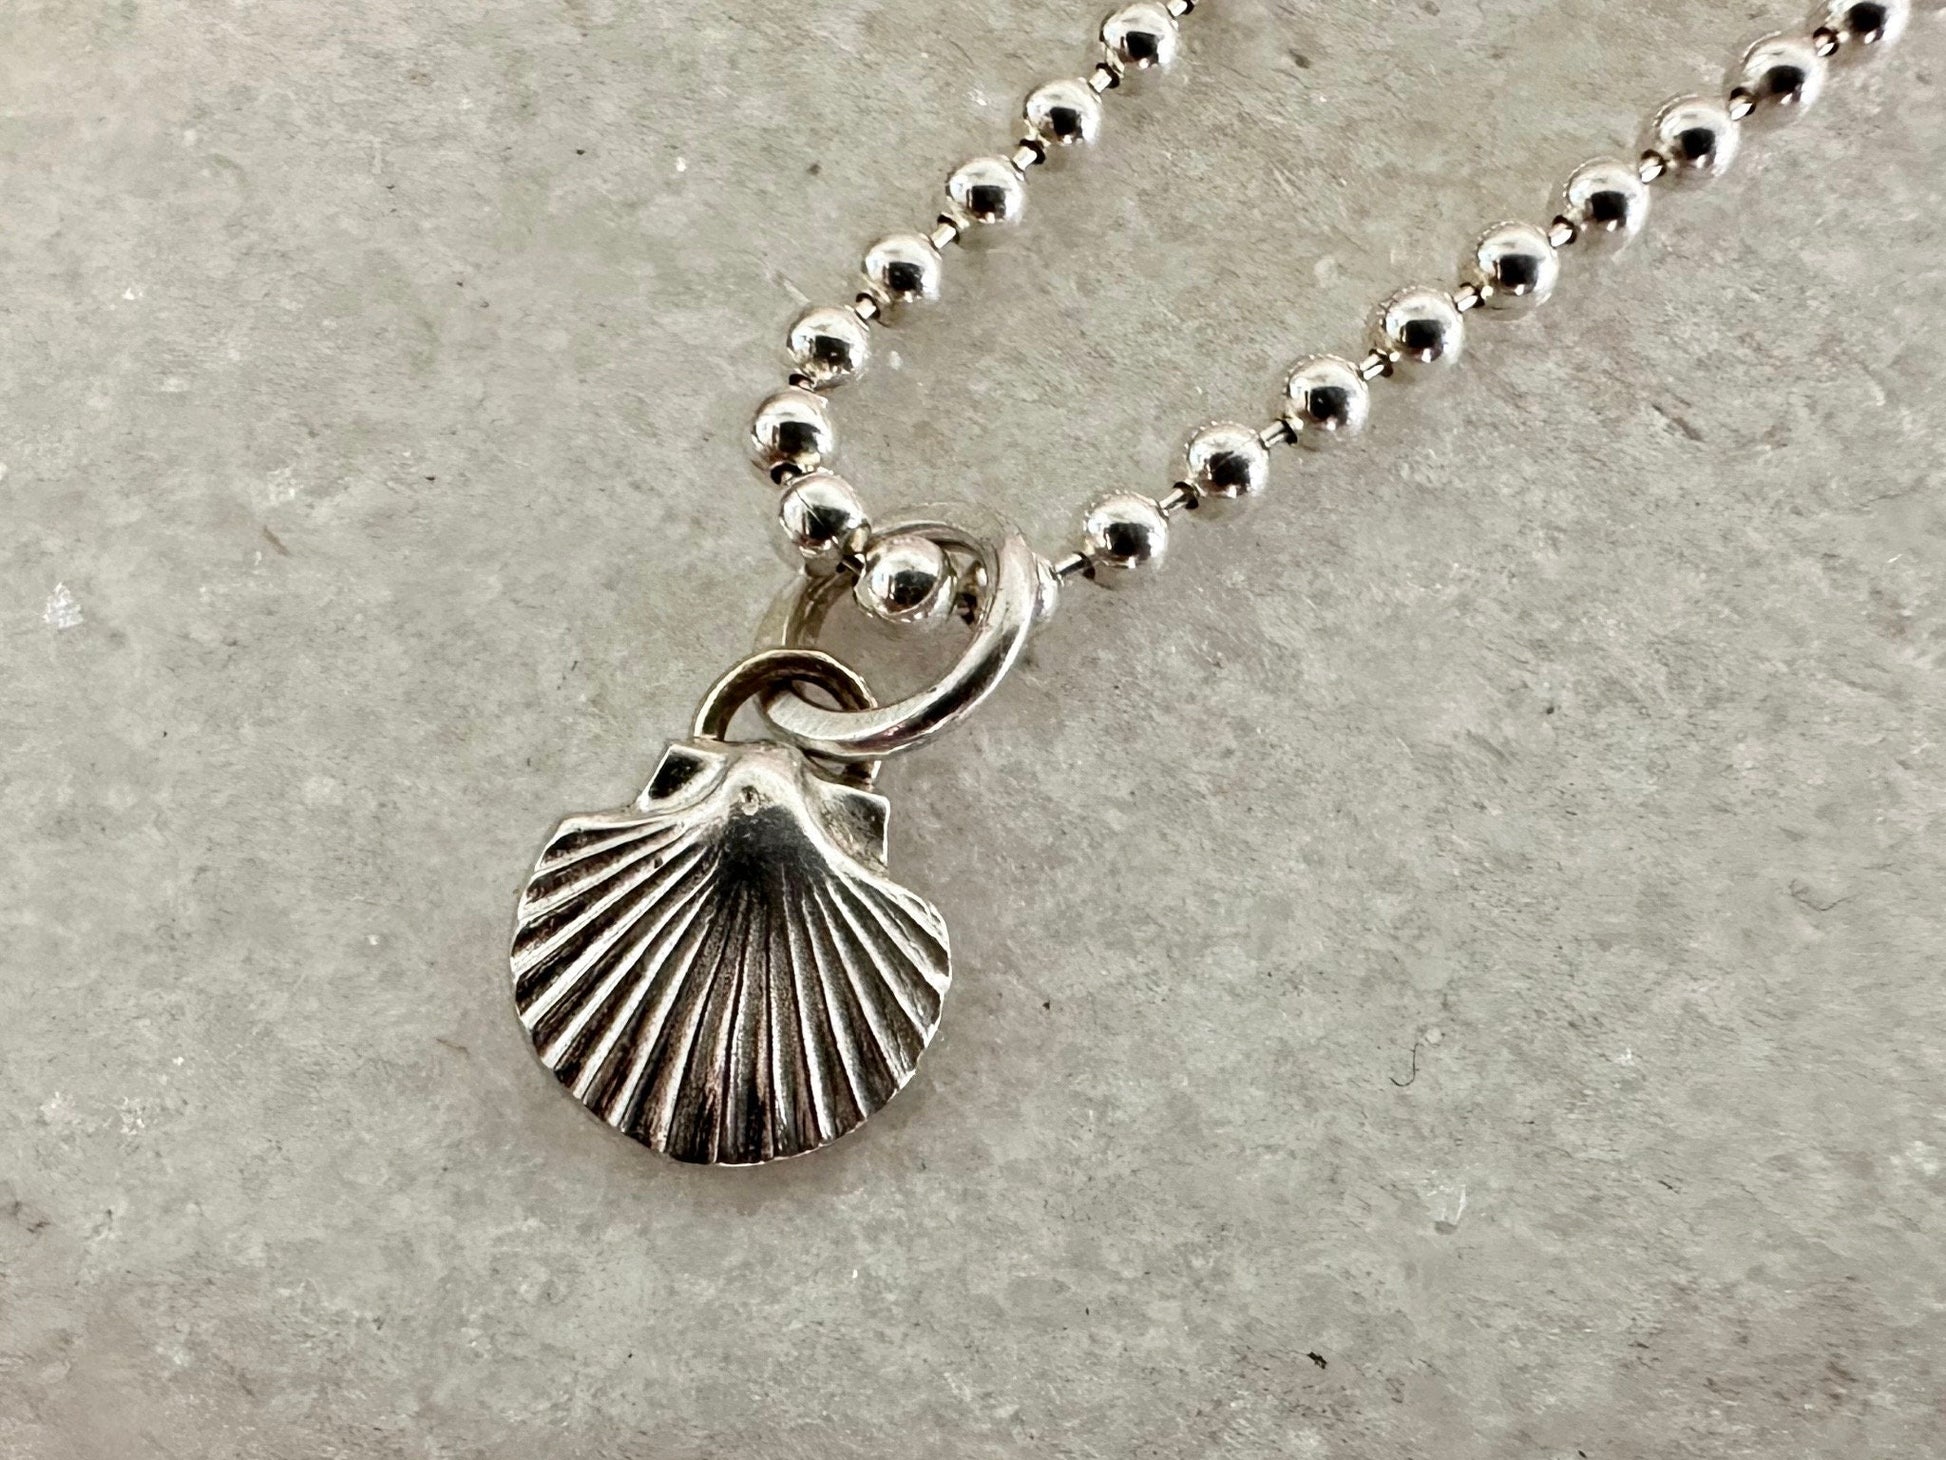 Sterling Silver Scallop Seashell pendant charm necklace with 9ct Gold bail, handmade from recycled 925 Sterling Silver, made to order